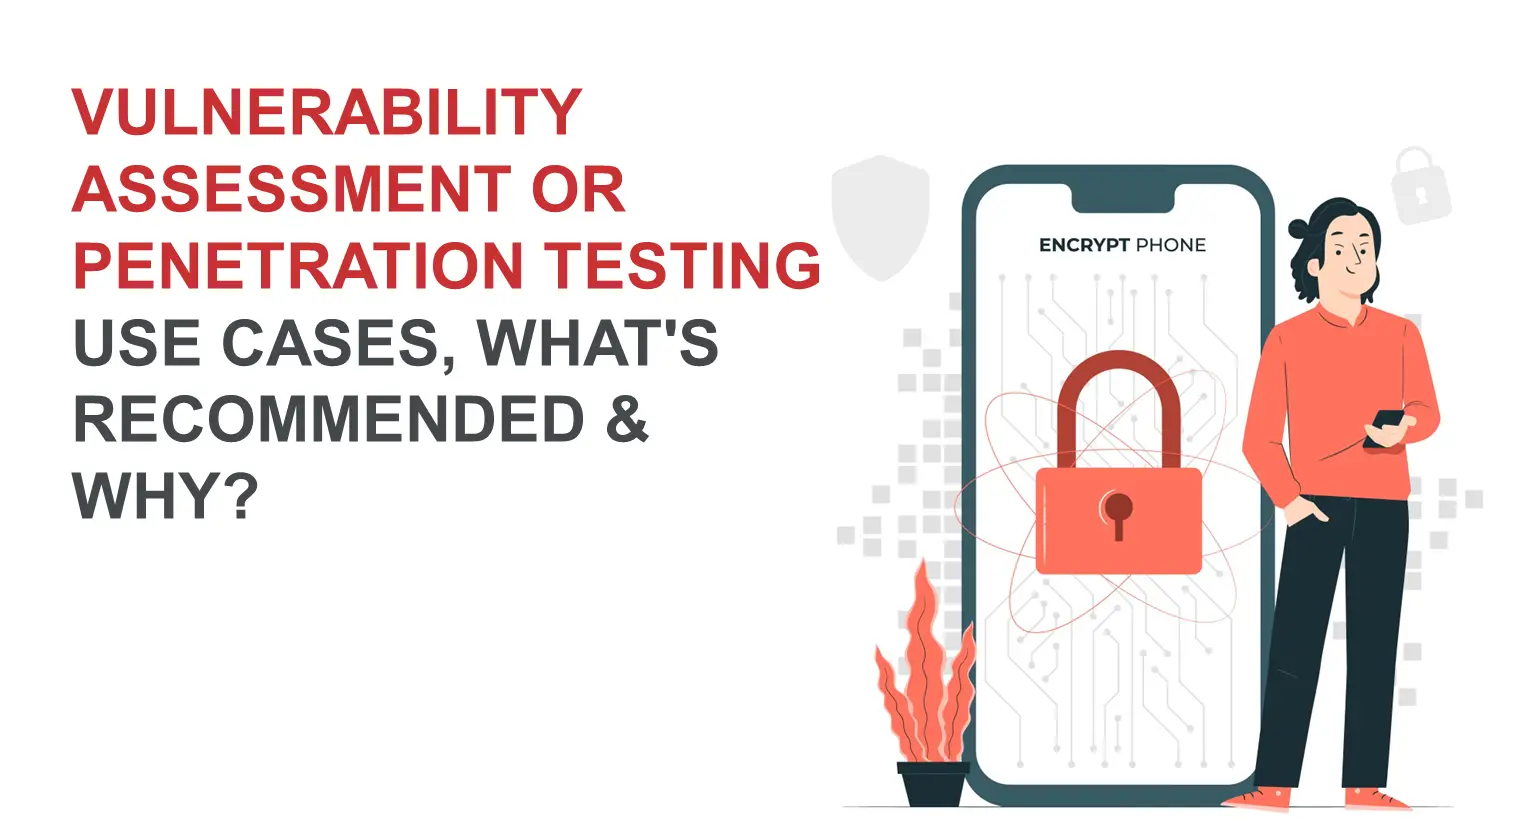 Vulnerability Assessment Or Penetration Testing Use Cases, What's Recommended, And Why?